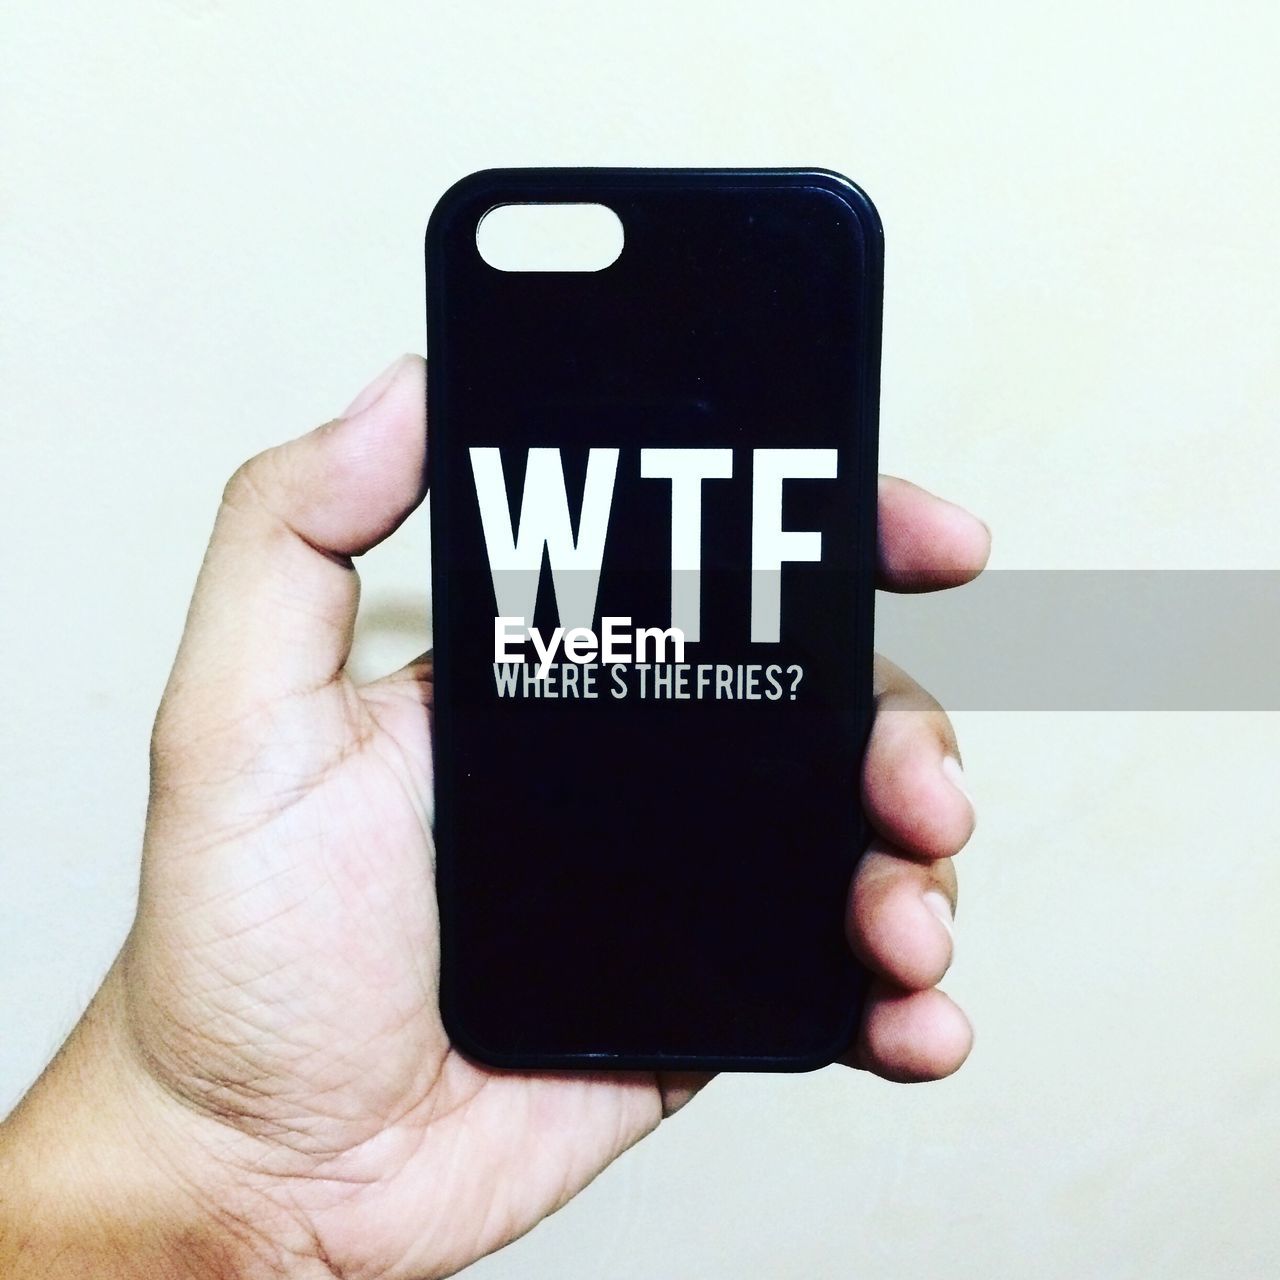 Cropped image of person holding phone cover with wtf text